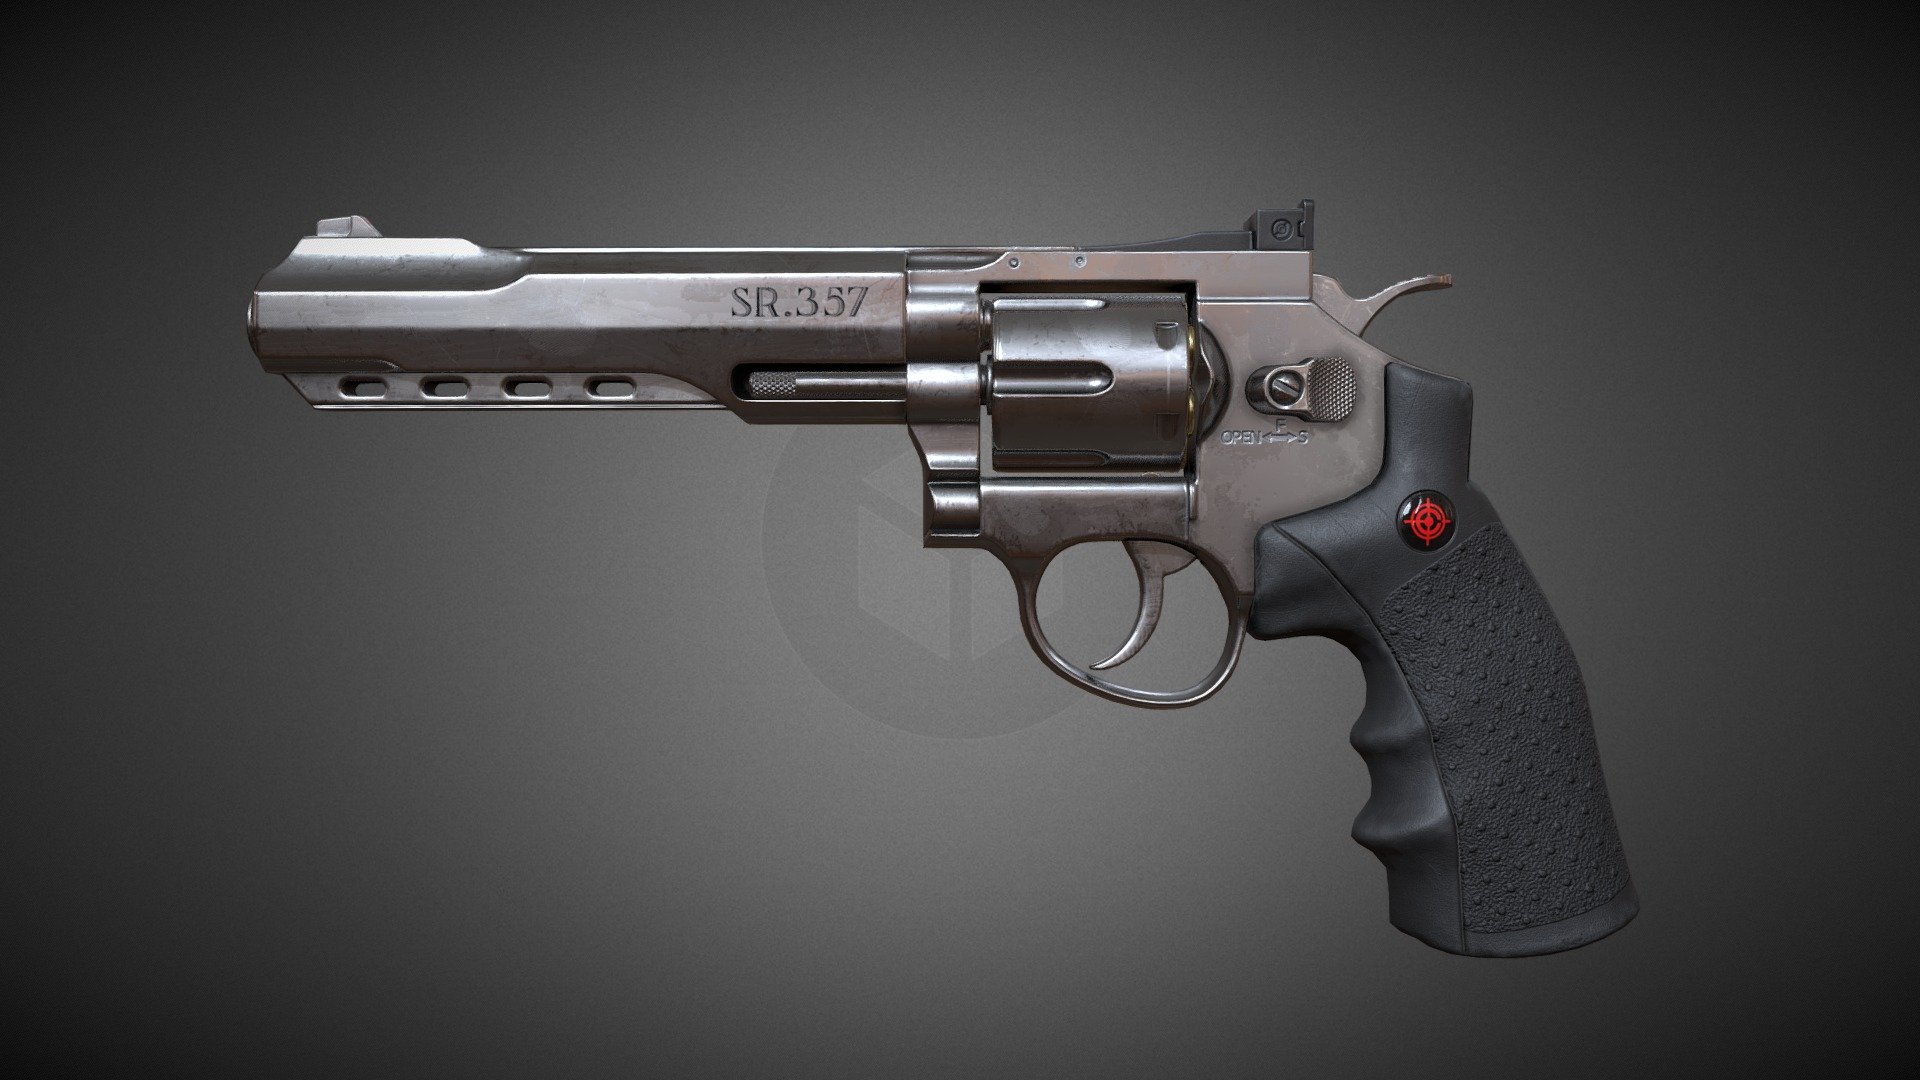 Crossman SR.357 Revolver. Game ready, low poly model.
The mesh is already triangulated so it can be imported to a game engine and avoid any artifacts on the mesh. Additional Obj. and Fbx. file (not triangulated) is also supplied. 
Moving parts like the main cylinder, trigger and Hammer have the pivot in the correct location so its easyer and ready to animate.

1x Material set: Revolver 4k =4096x4096

Textures included for Unity, CryEngine, Unreal and 1x set Standard PBR (Metal/Roughness) workflow.

More renders on my Artstation here: https://www.artstation.com/artwork/B3JLLz

Social media and Contact:

Artstation: https://www.artstation.com/brunogf13 - Crossman SR.357 Revolver - Buy Royalty Free 3D model by artbyBruno (@Bruno.Fonseca1) 3d model